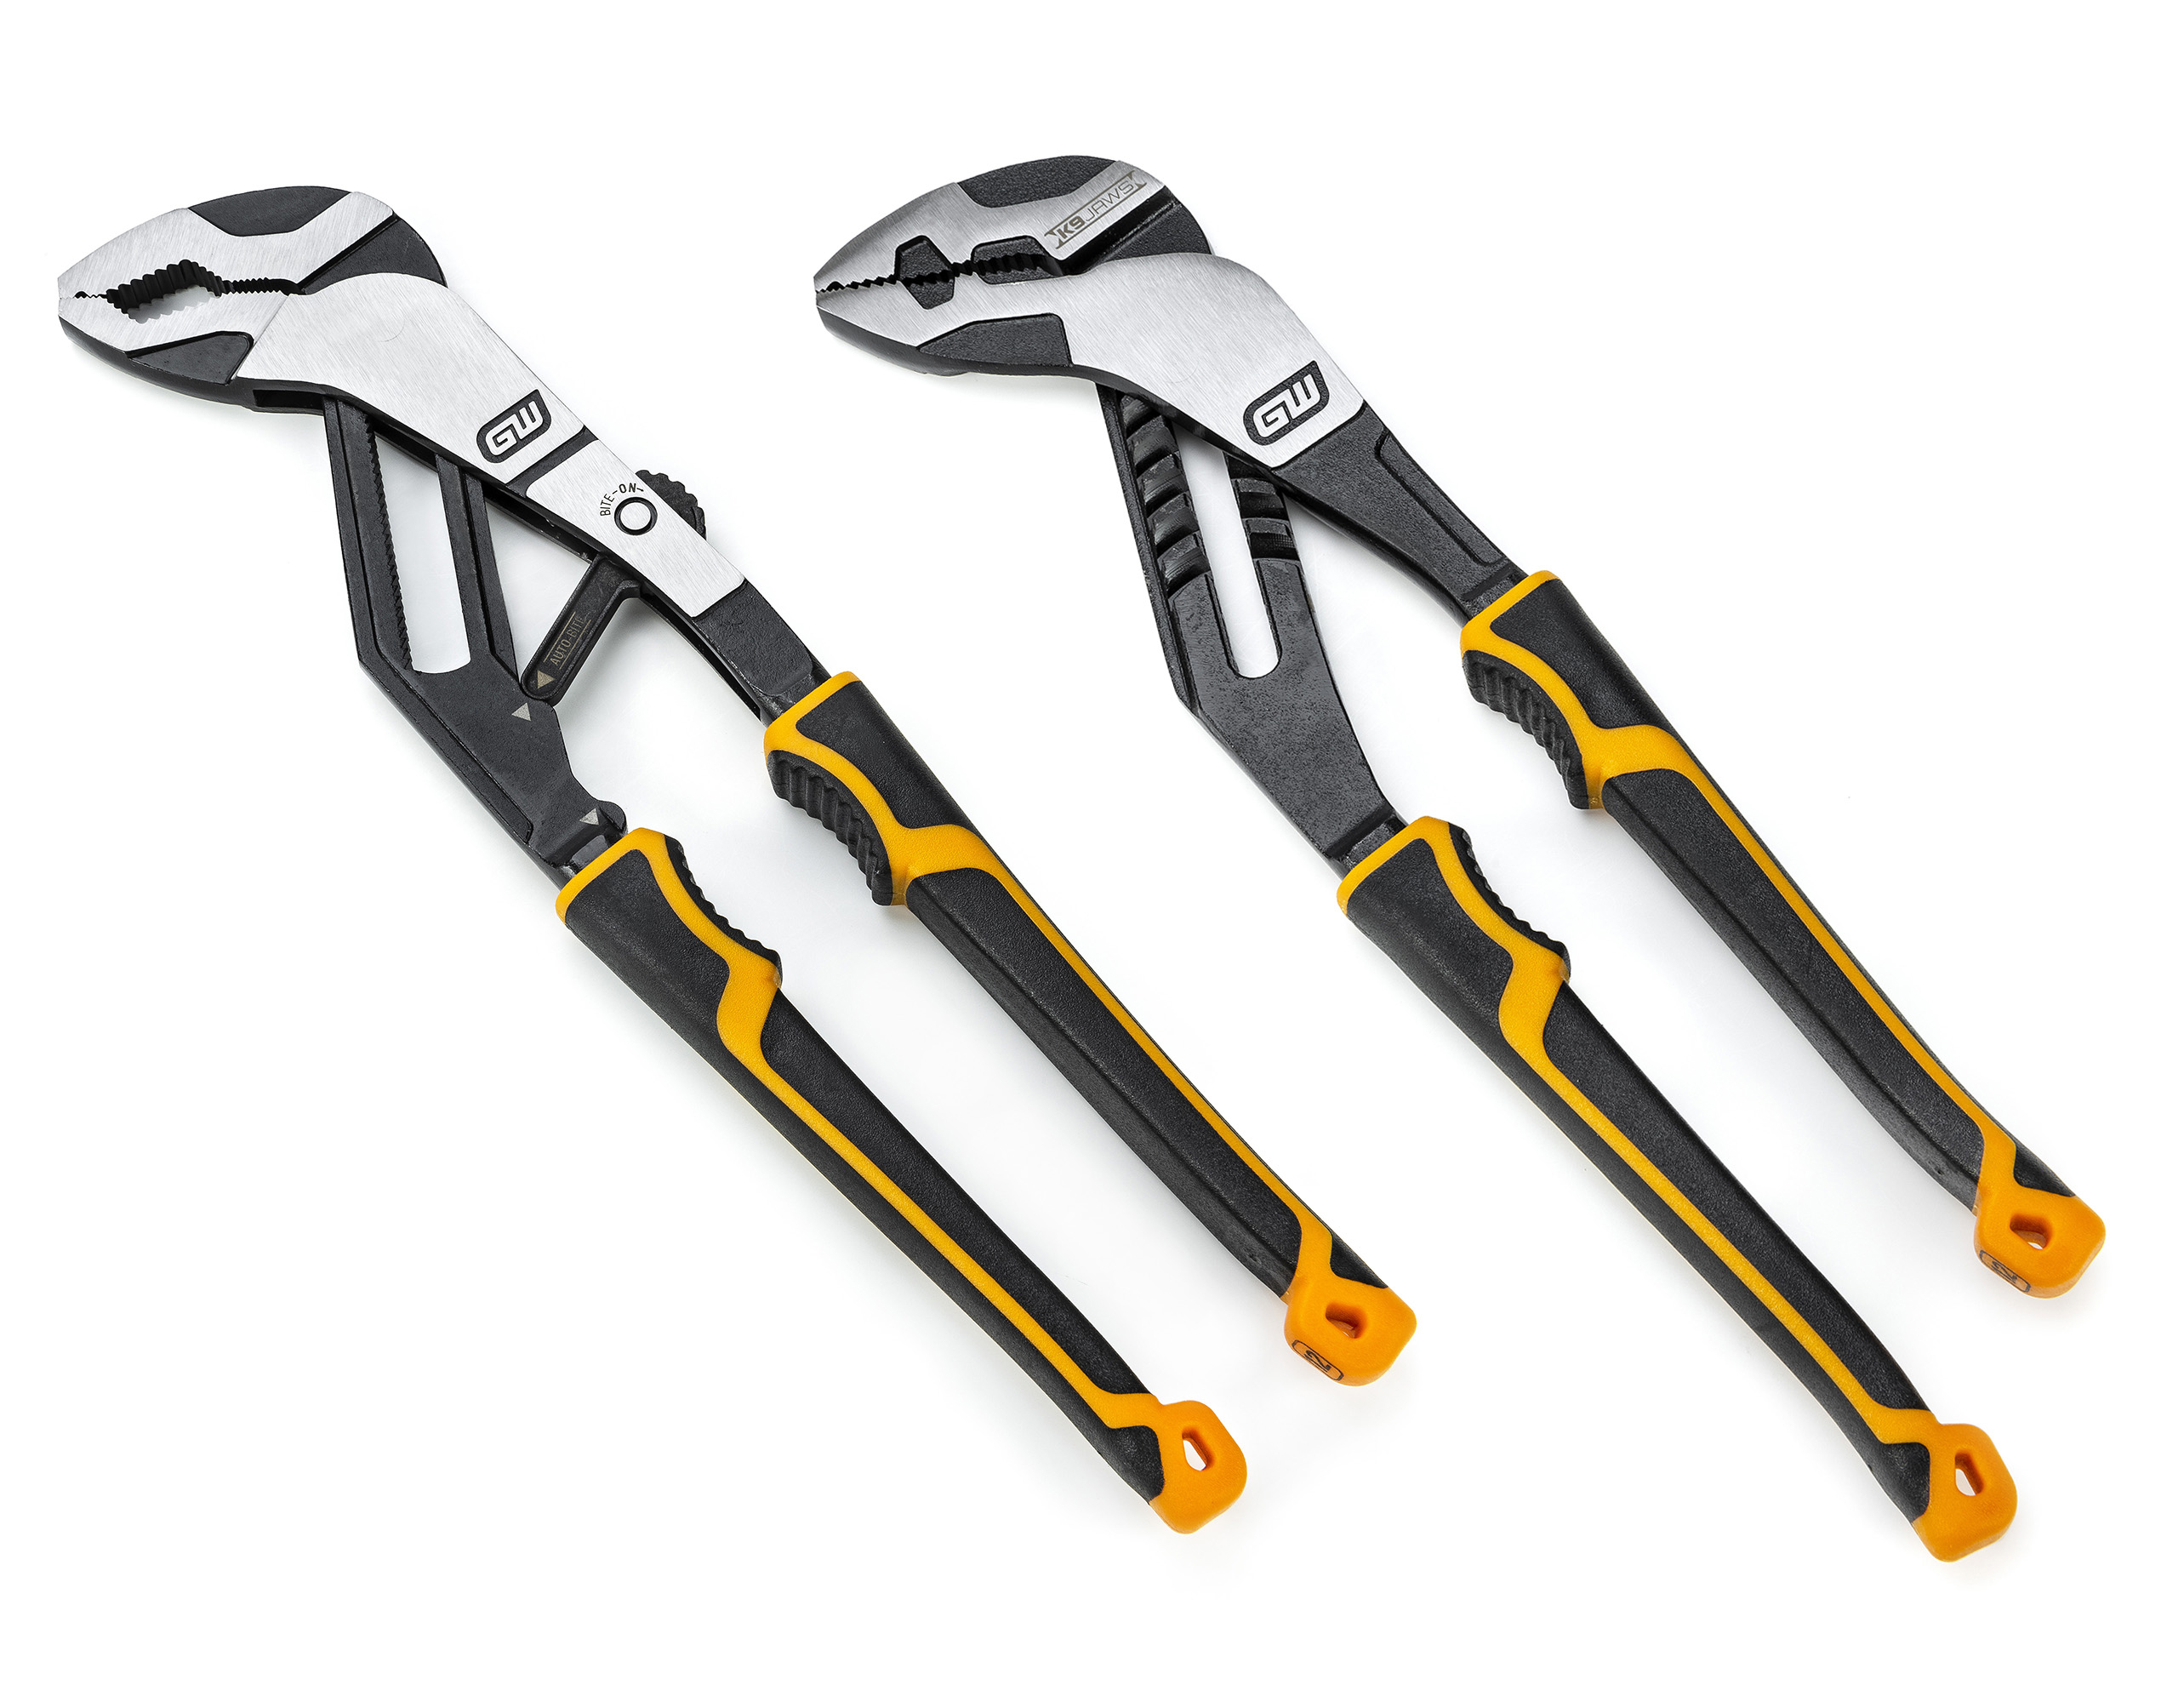 Automotive, Industrial Mechanics Will Have a New Best Friend in PitBull Pliers from GEARWRENCH